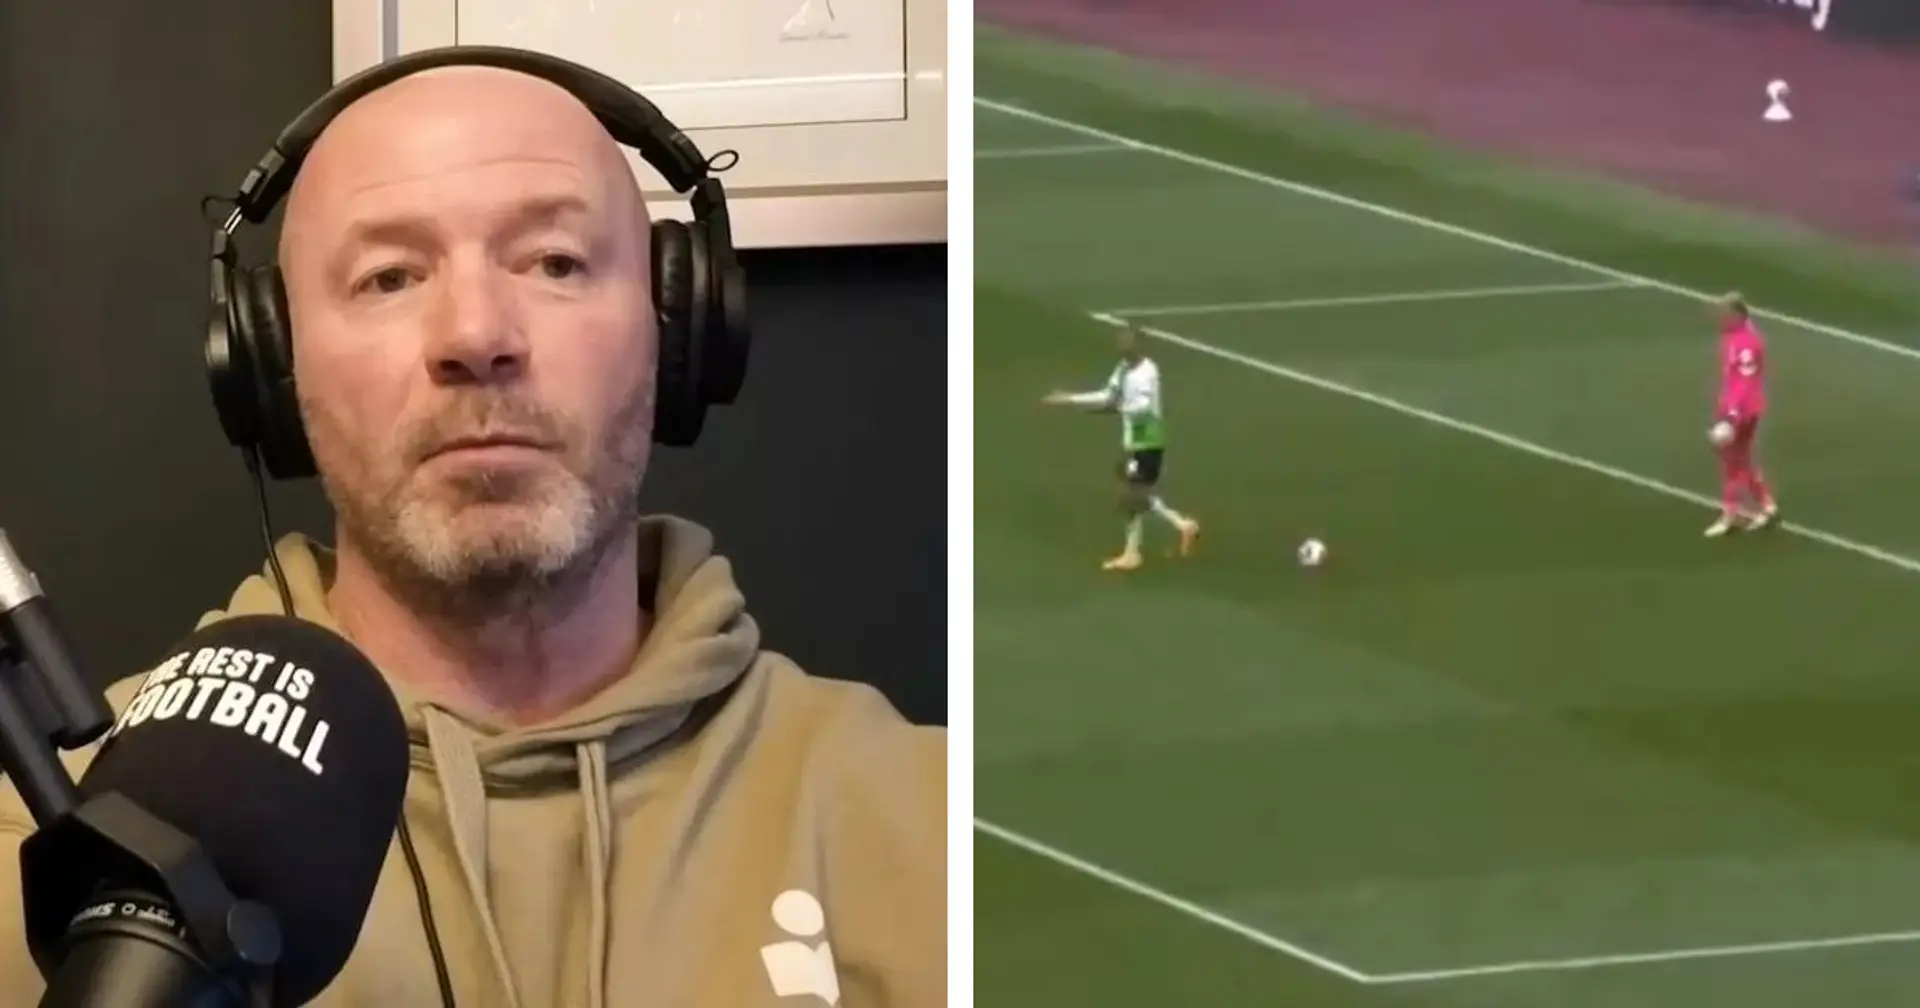 'It’s a mess': Alan Shearer slams ref after Cody Gakpo controversy in West Ham game